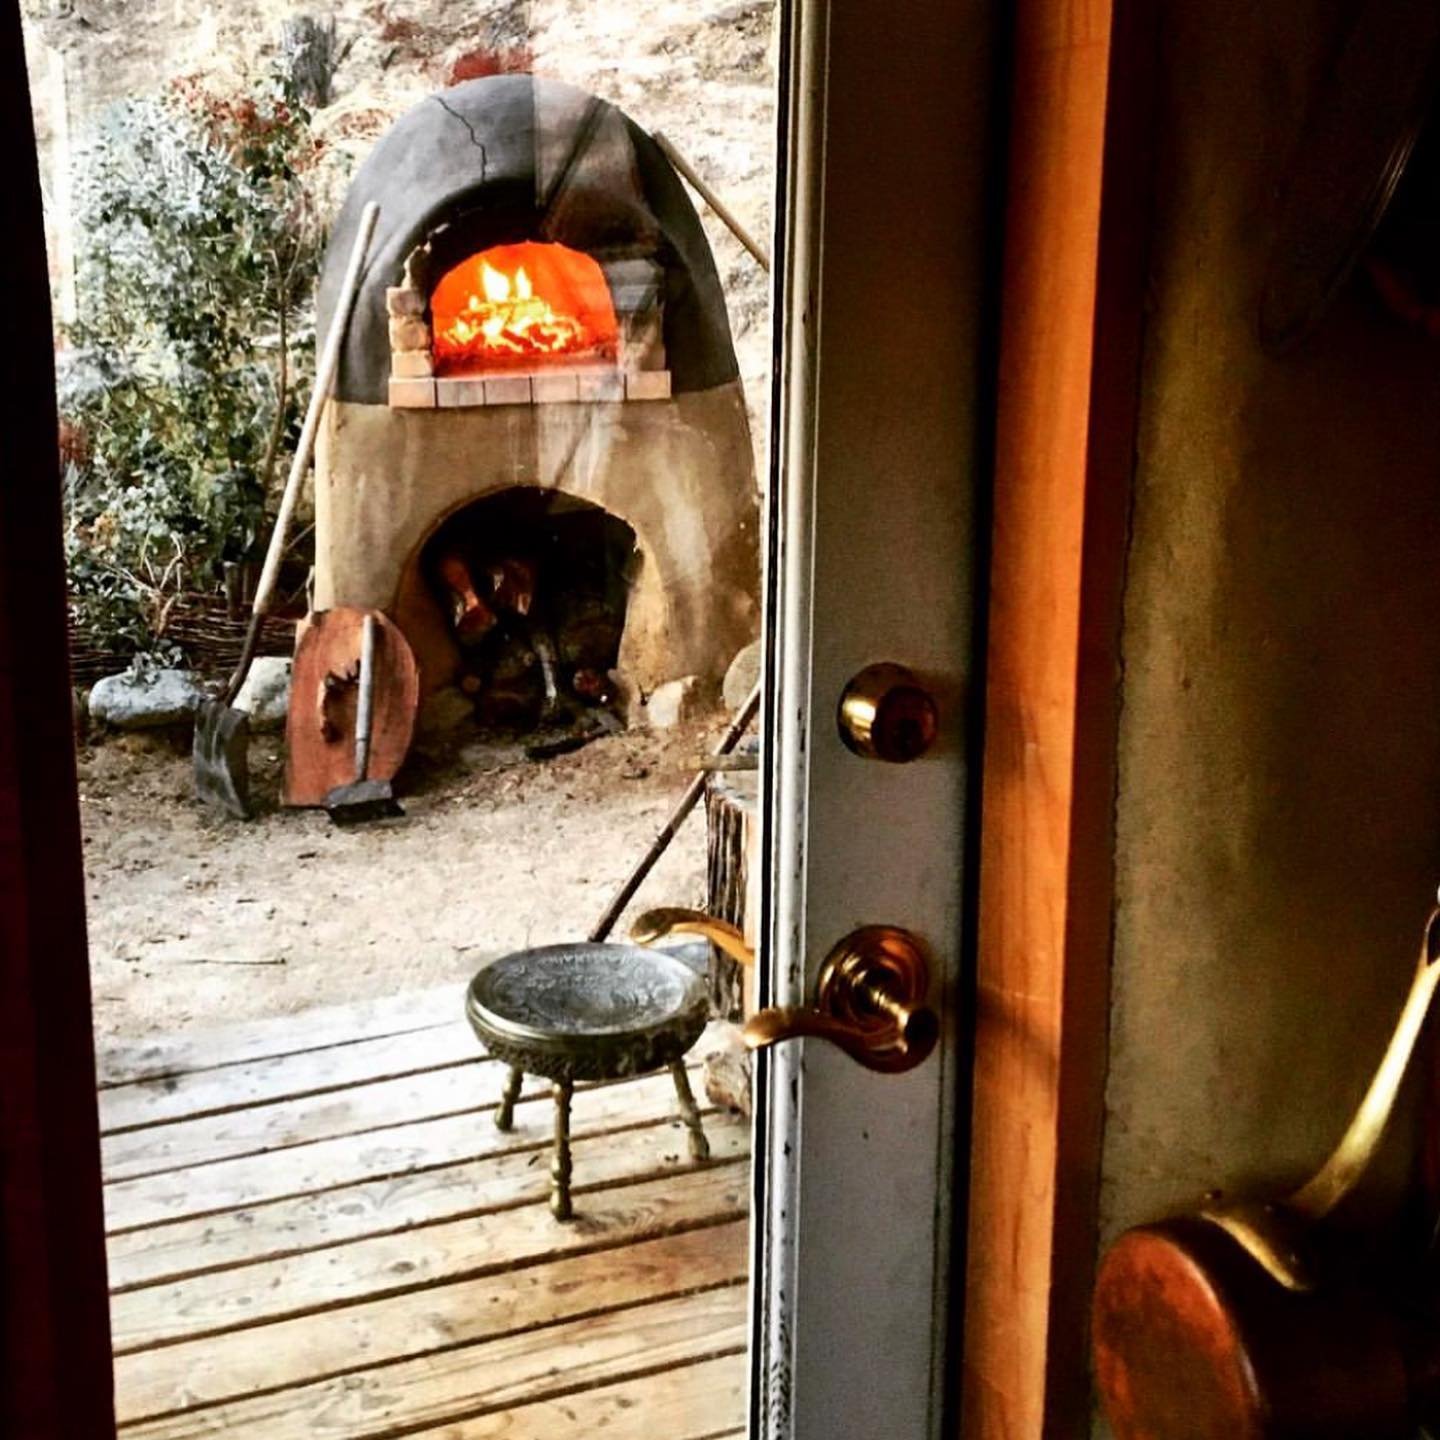 Location is a critical part of any cob oven design. We want space for friends to gather nearby, but I also want to be able to see inside the oven from the kitchen. This way I can keep an eye on the fire while prepping food inside the kitchen. A sligh